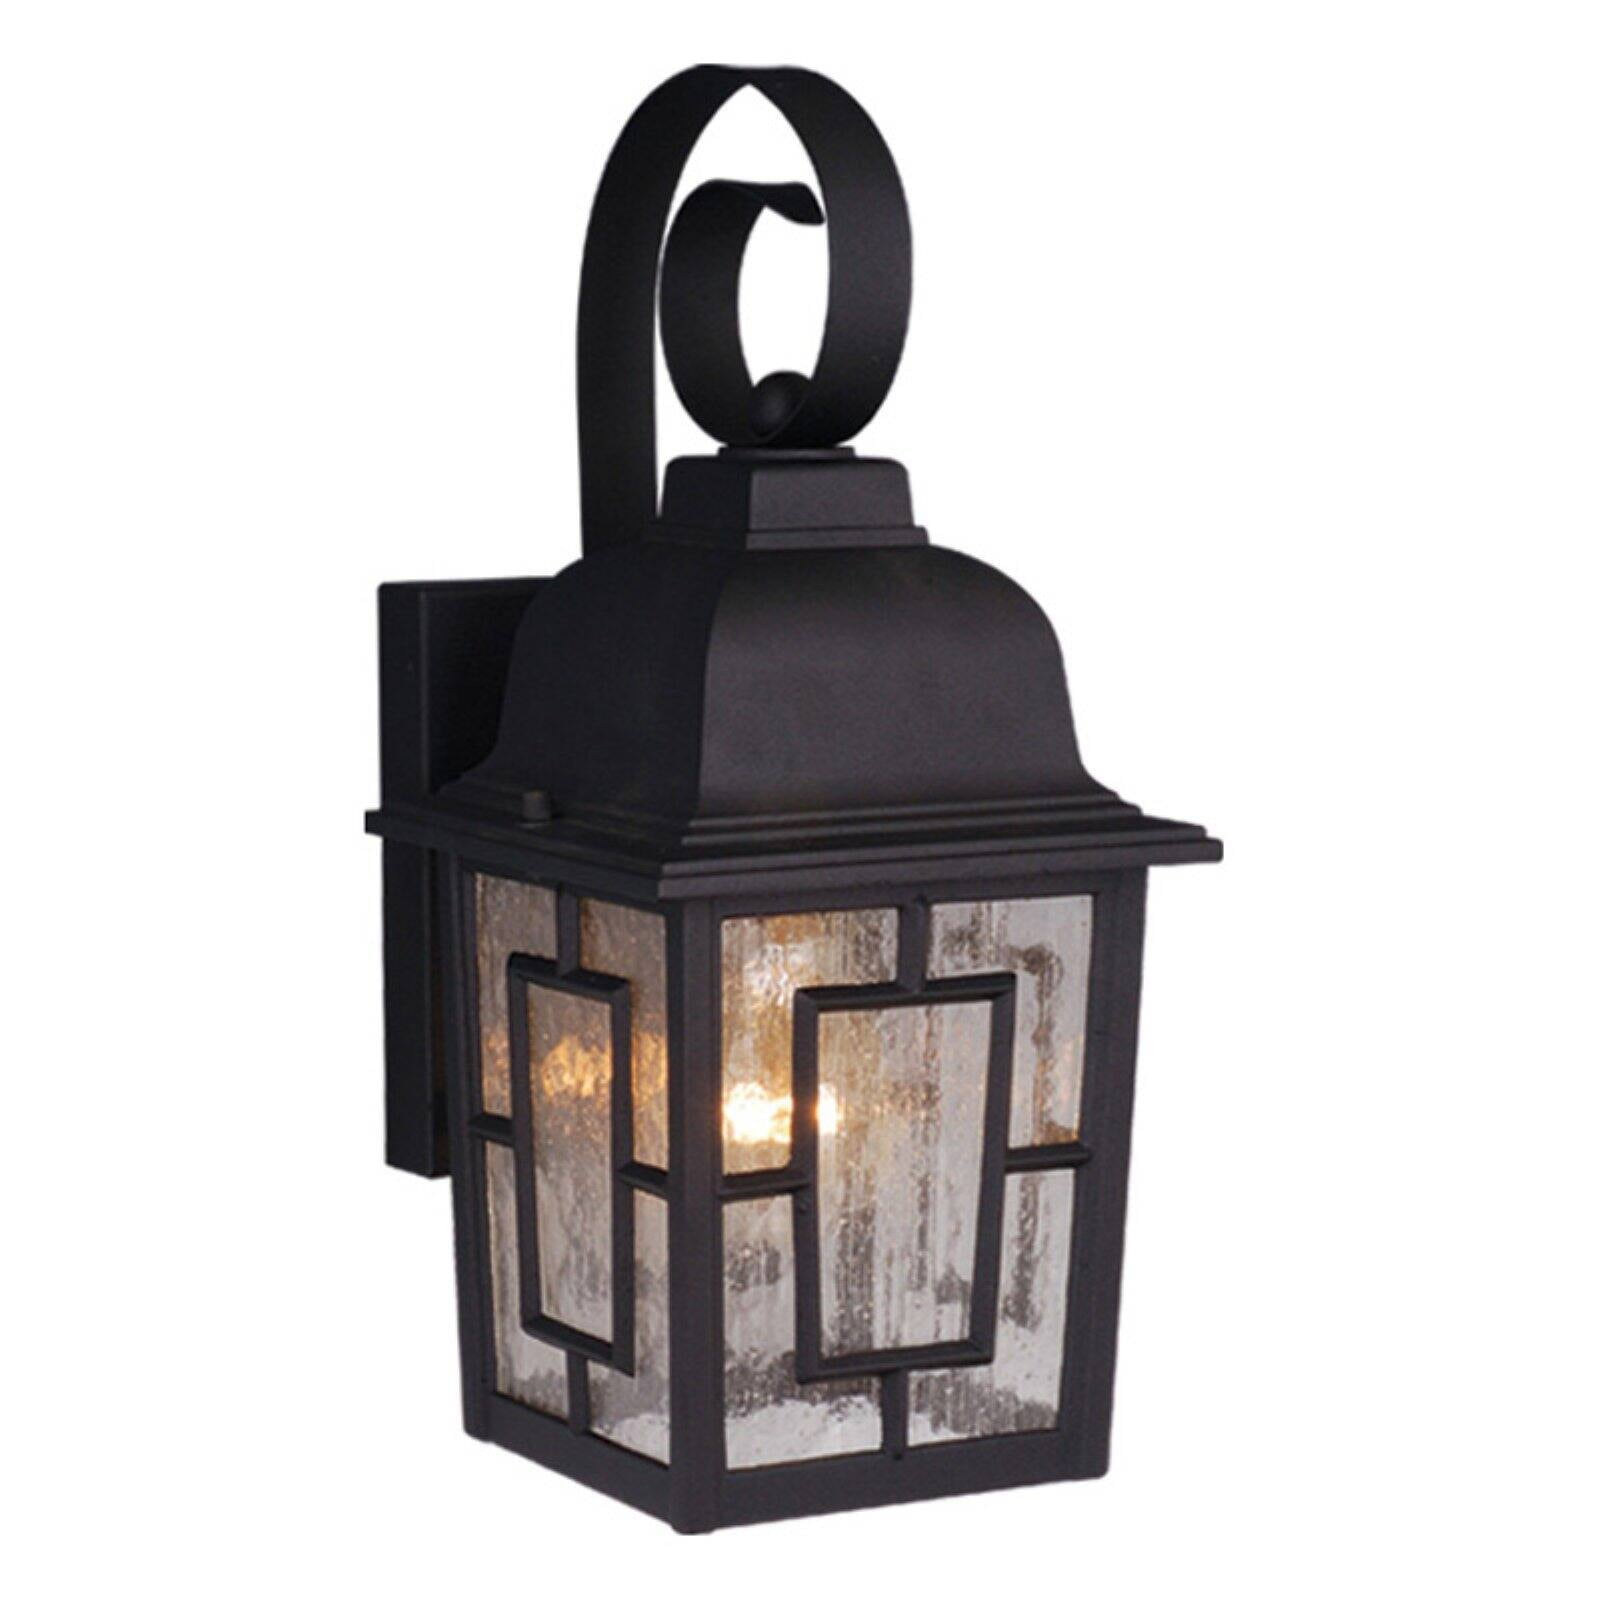 Vaxcel Vista OW37563 Outdoor Wall Sconce